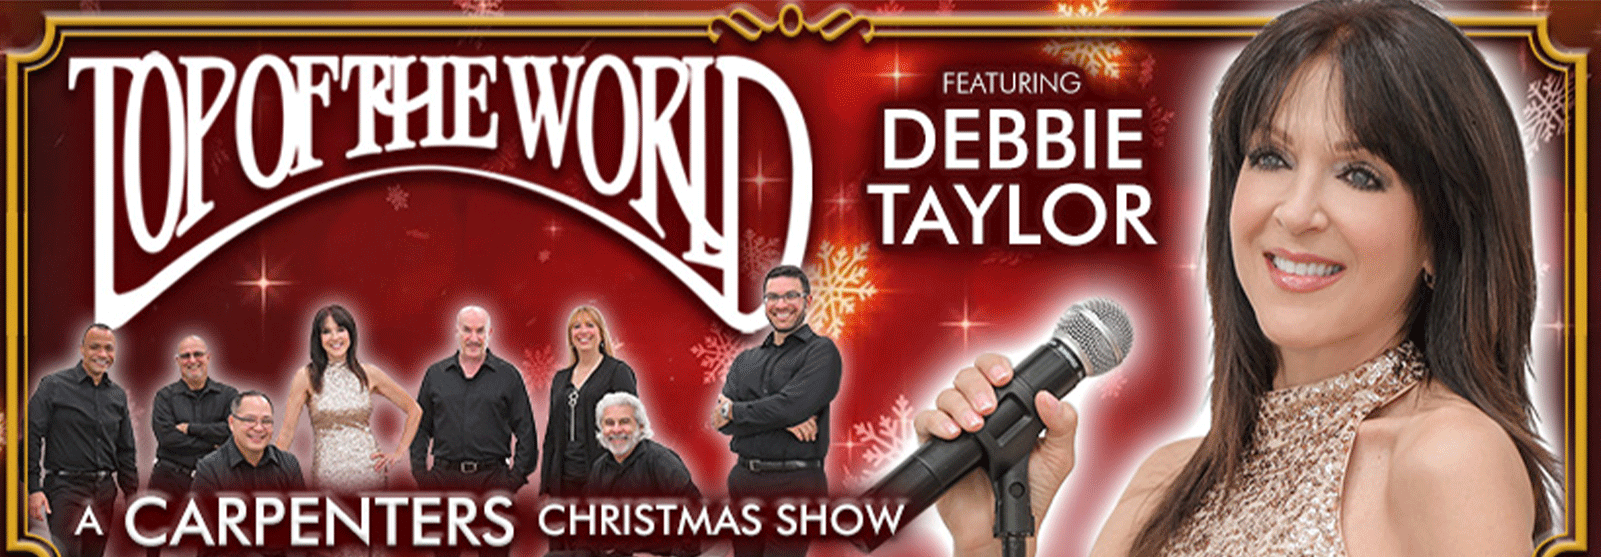 Top of the World featuring Debbie Taylor 